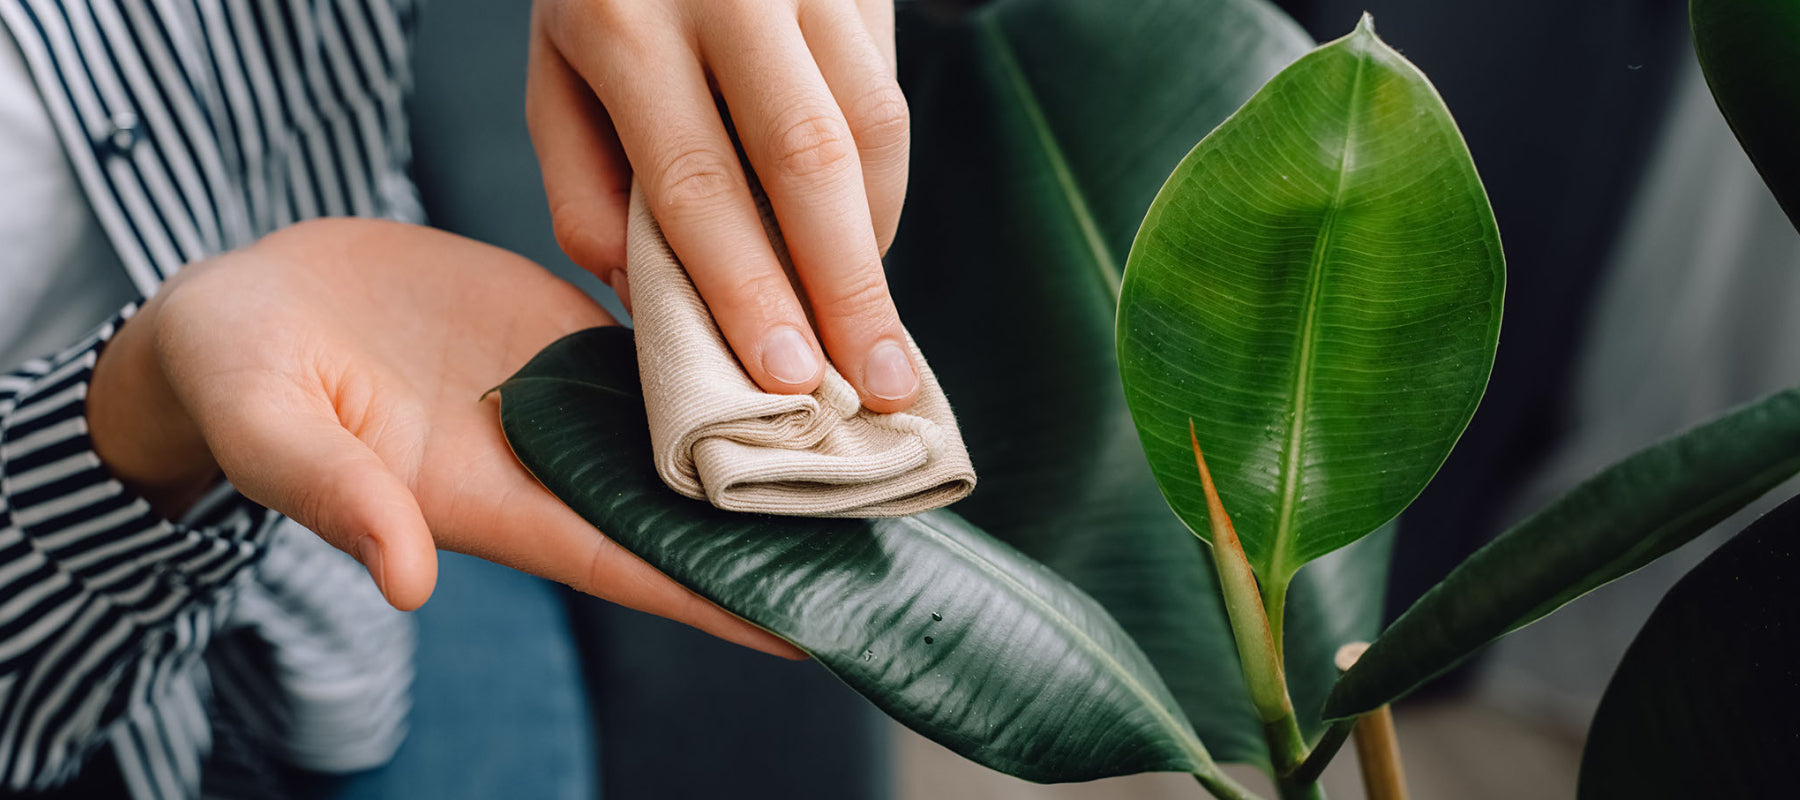 How To: Spring Clean Your Houseplants